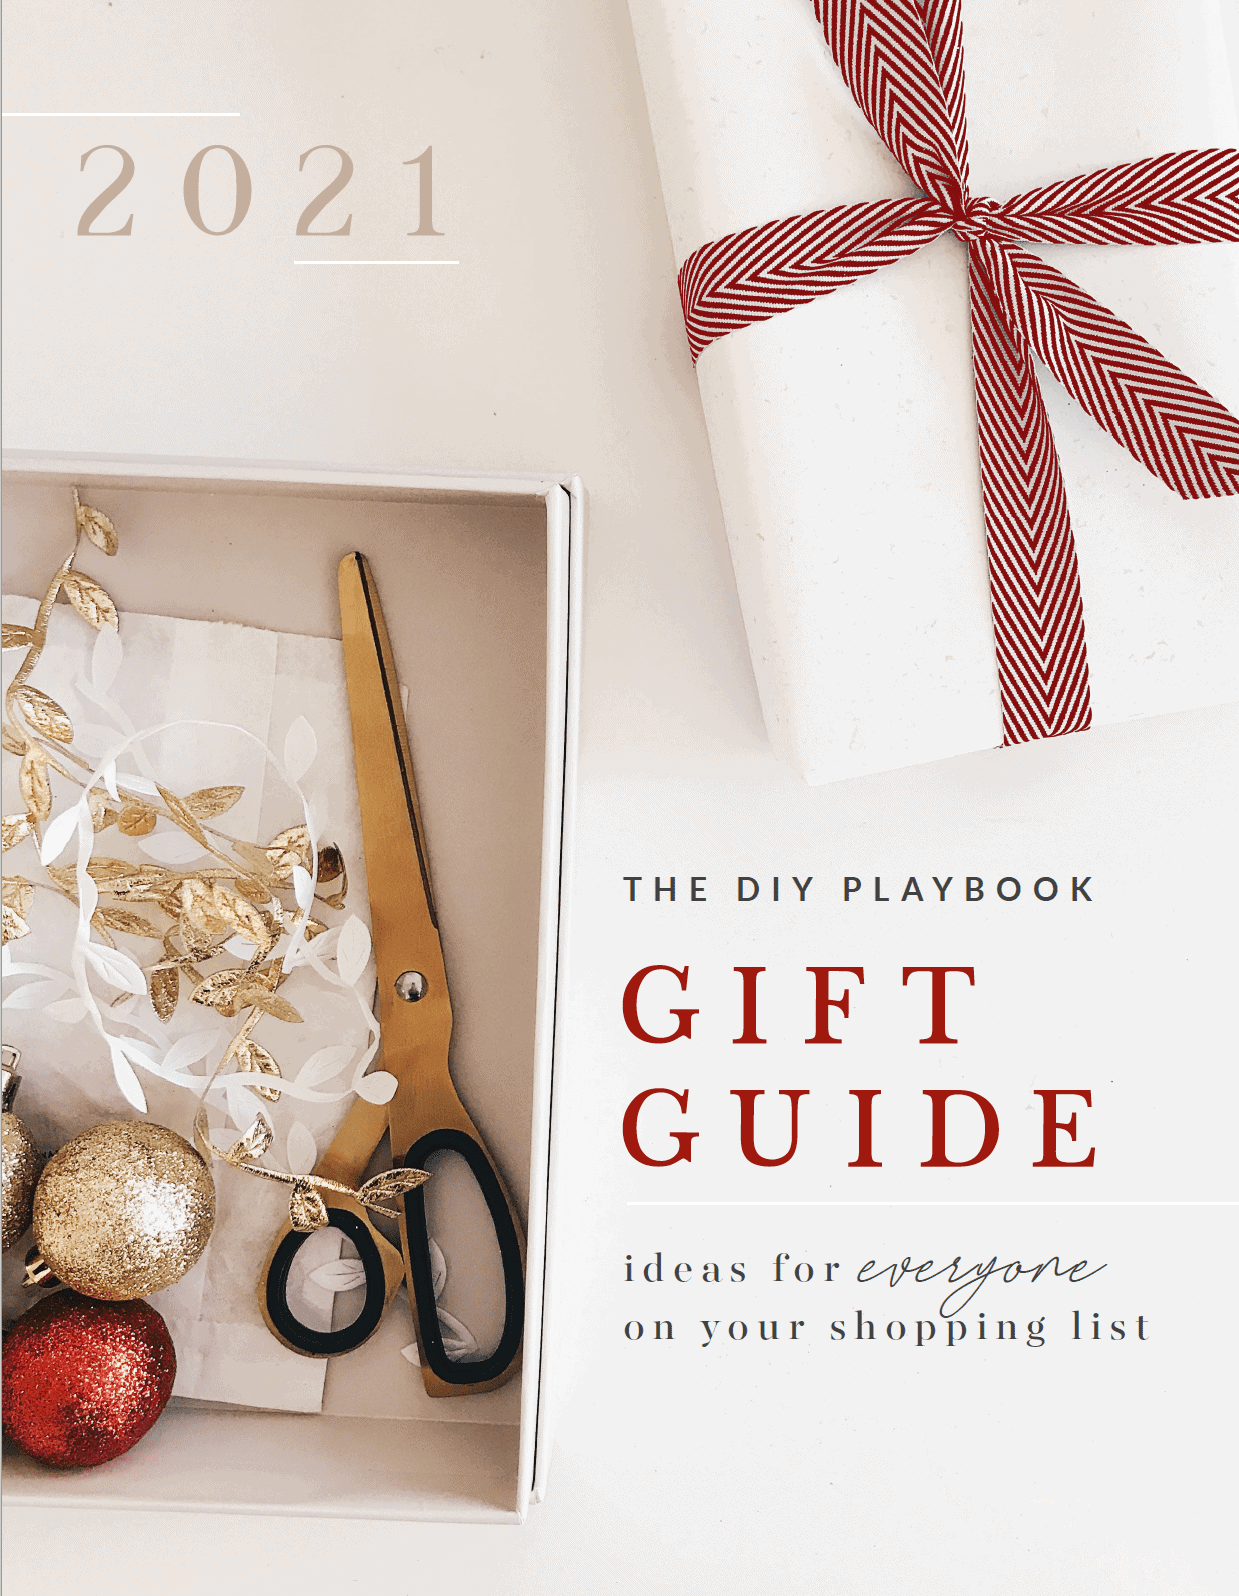 Our holiday gift guide 2021